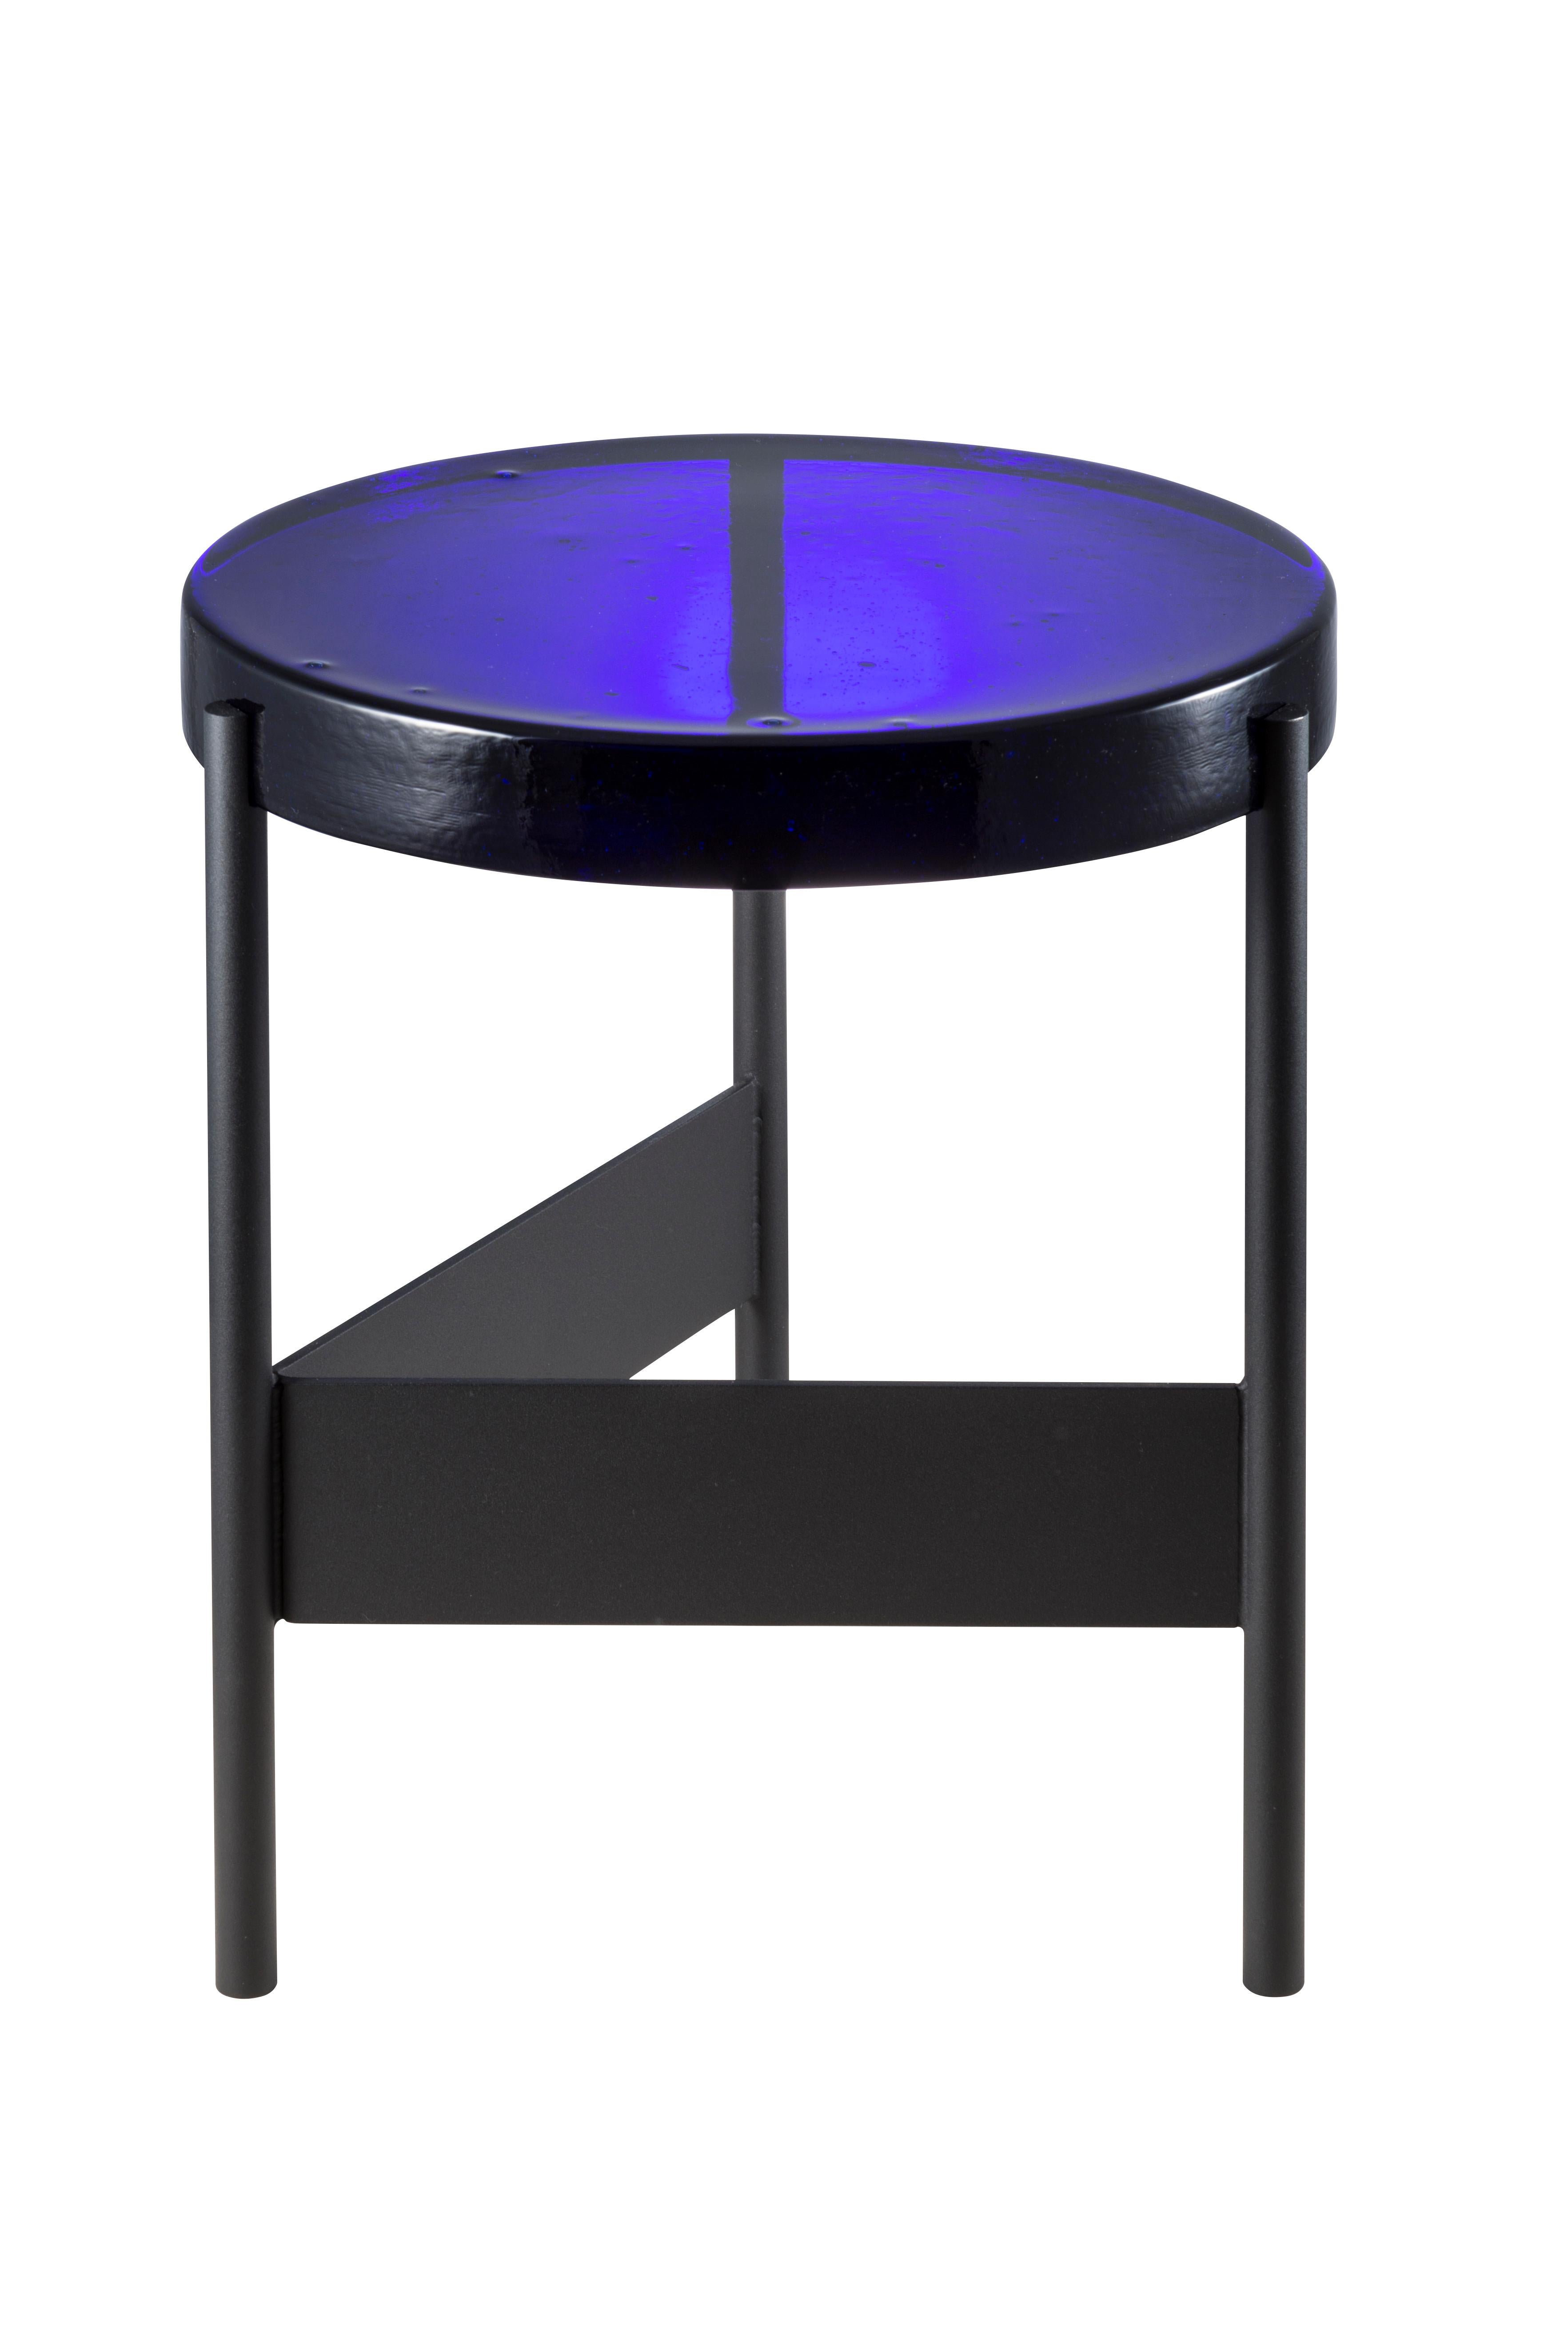 Alwa Two Blue Black Side Table by Pulpo
Dimensions: D38 x H44 cm
Materials: casted glass; powder coated steel 

Also available in different finishes. Please contact us.

Normally, glass is regarded as being lightweight with sharp edges. In contrast,